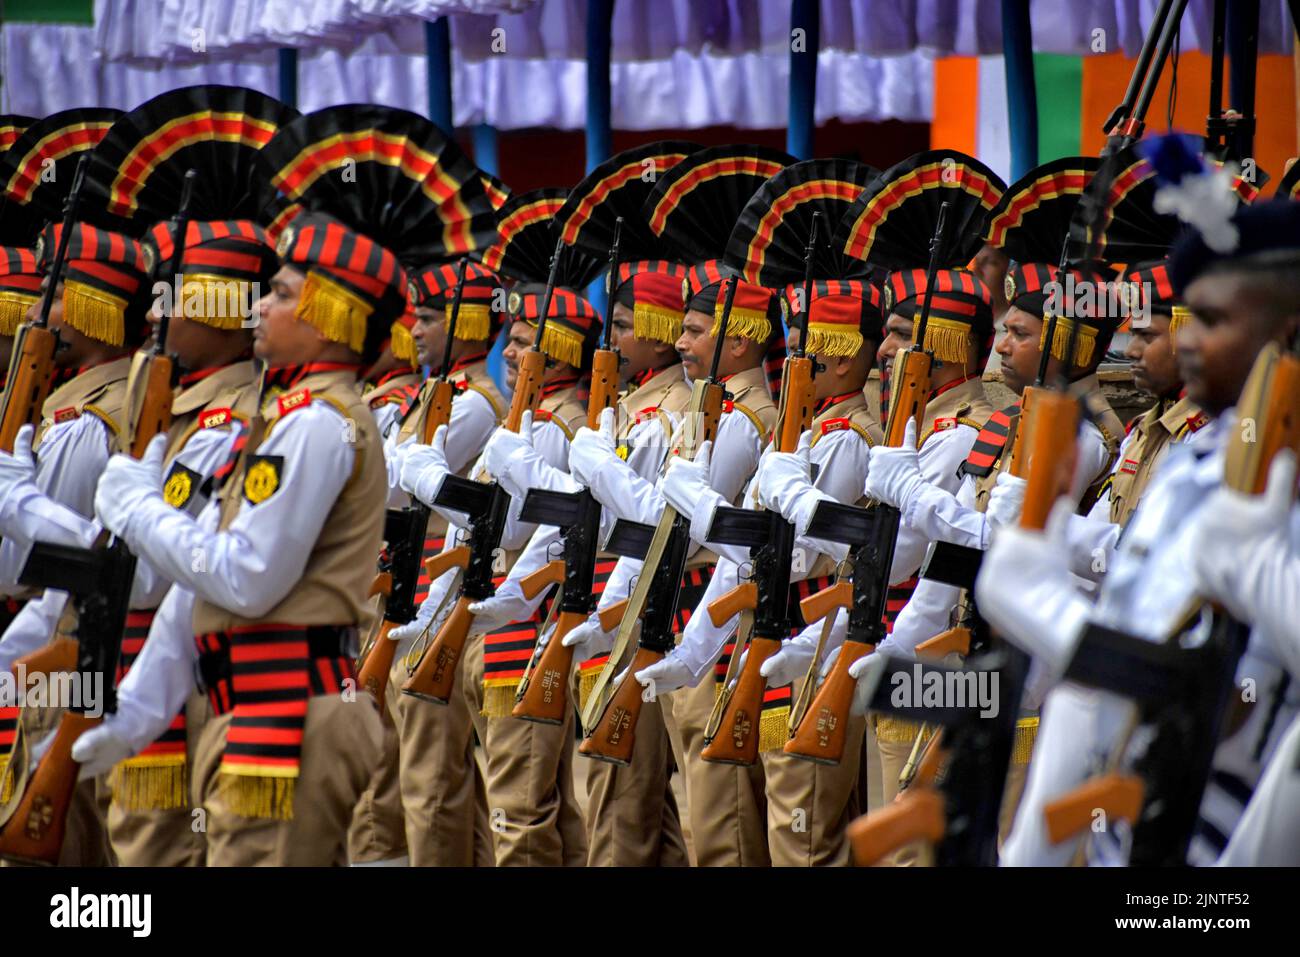 Army Contingent practice on the Final Dress rehearsal during the Independence day Final Dress Rehearsal. India prepares to celebrate the 75th Independence day on 15th August 2022 as part of the Azadi Ka Amrit Mahotsav celebration. Stock Photo